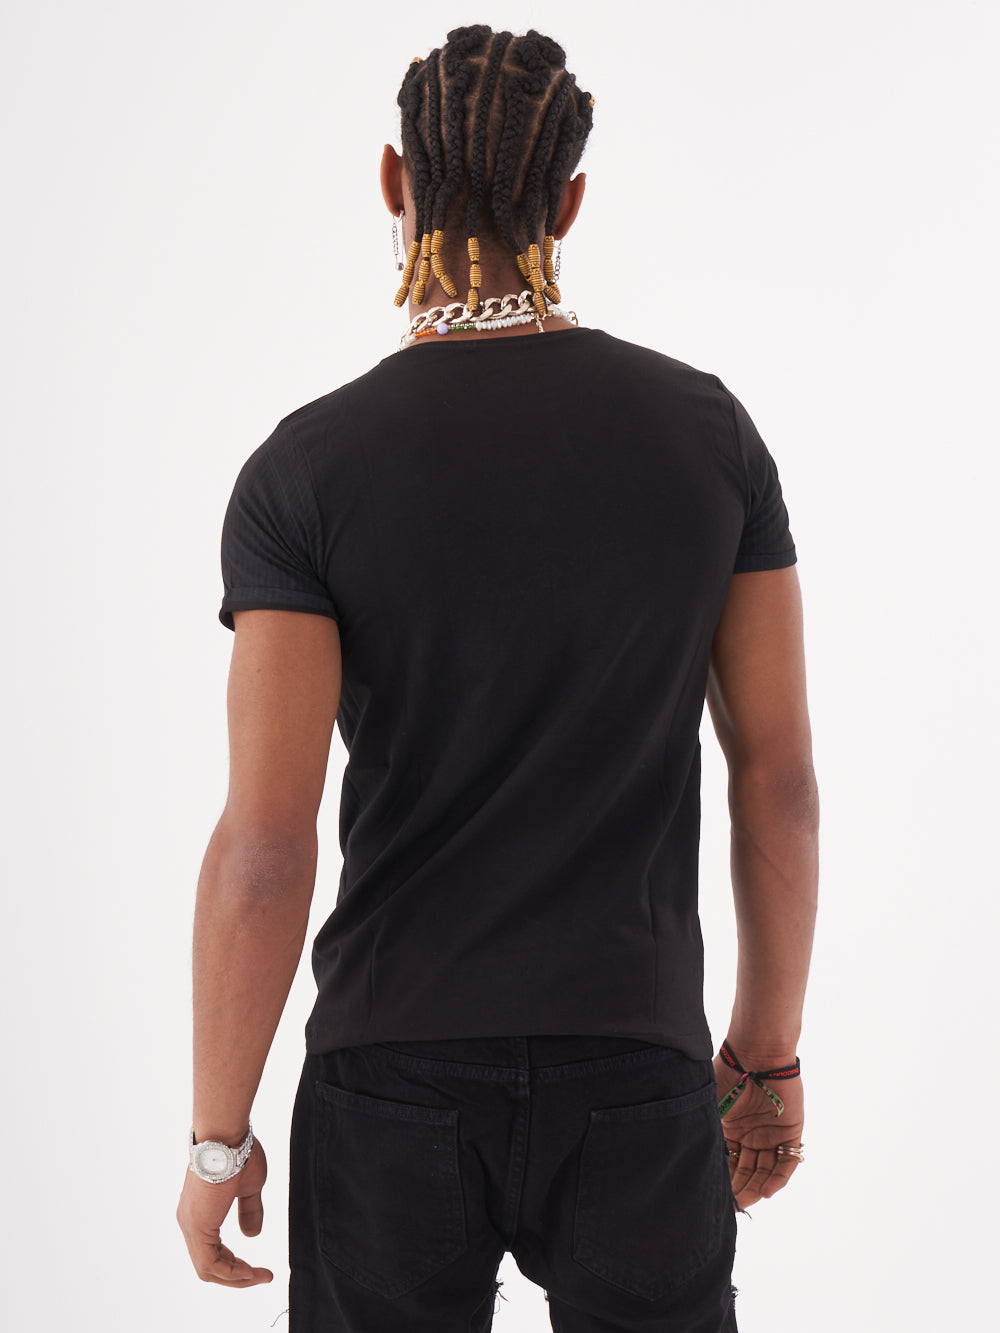 A man wearing a NIRVANA skull-print embellished T-SHIRT in black color with relaxed fit streetwear jeans 